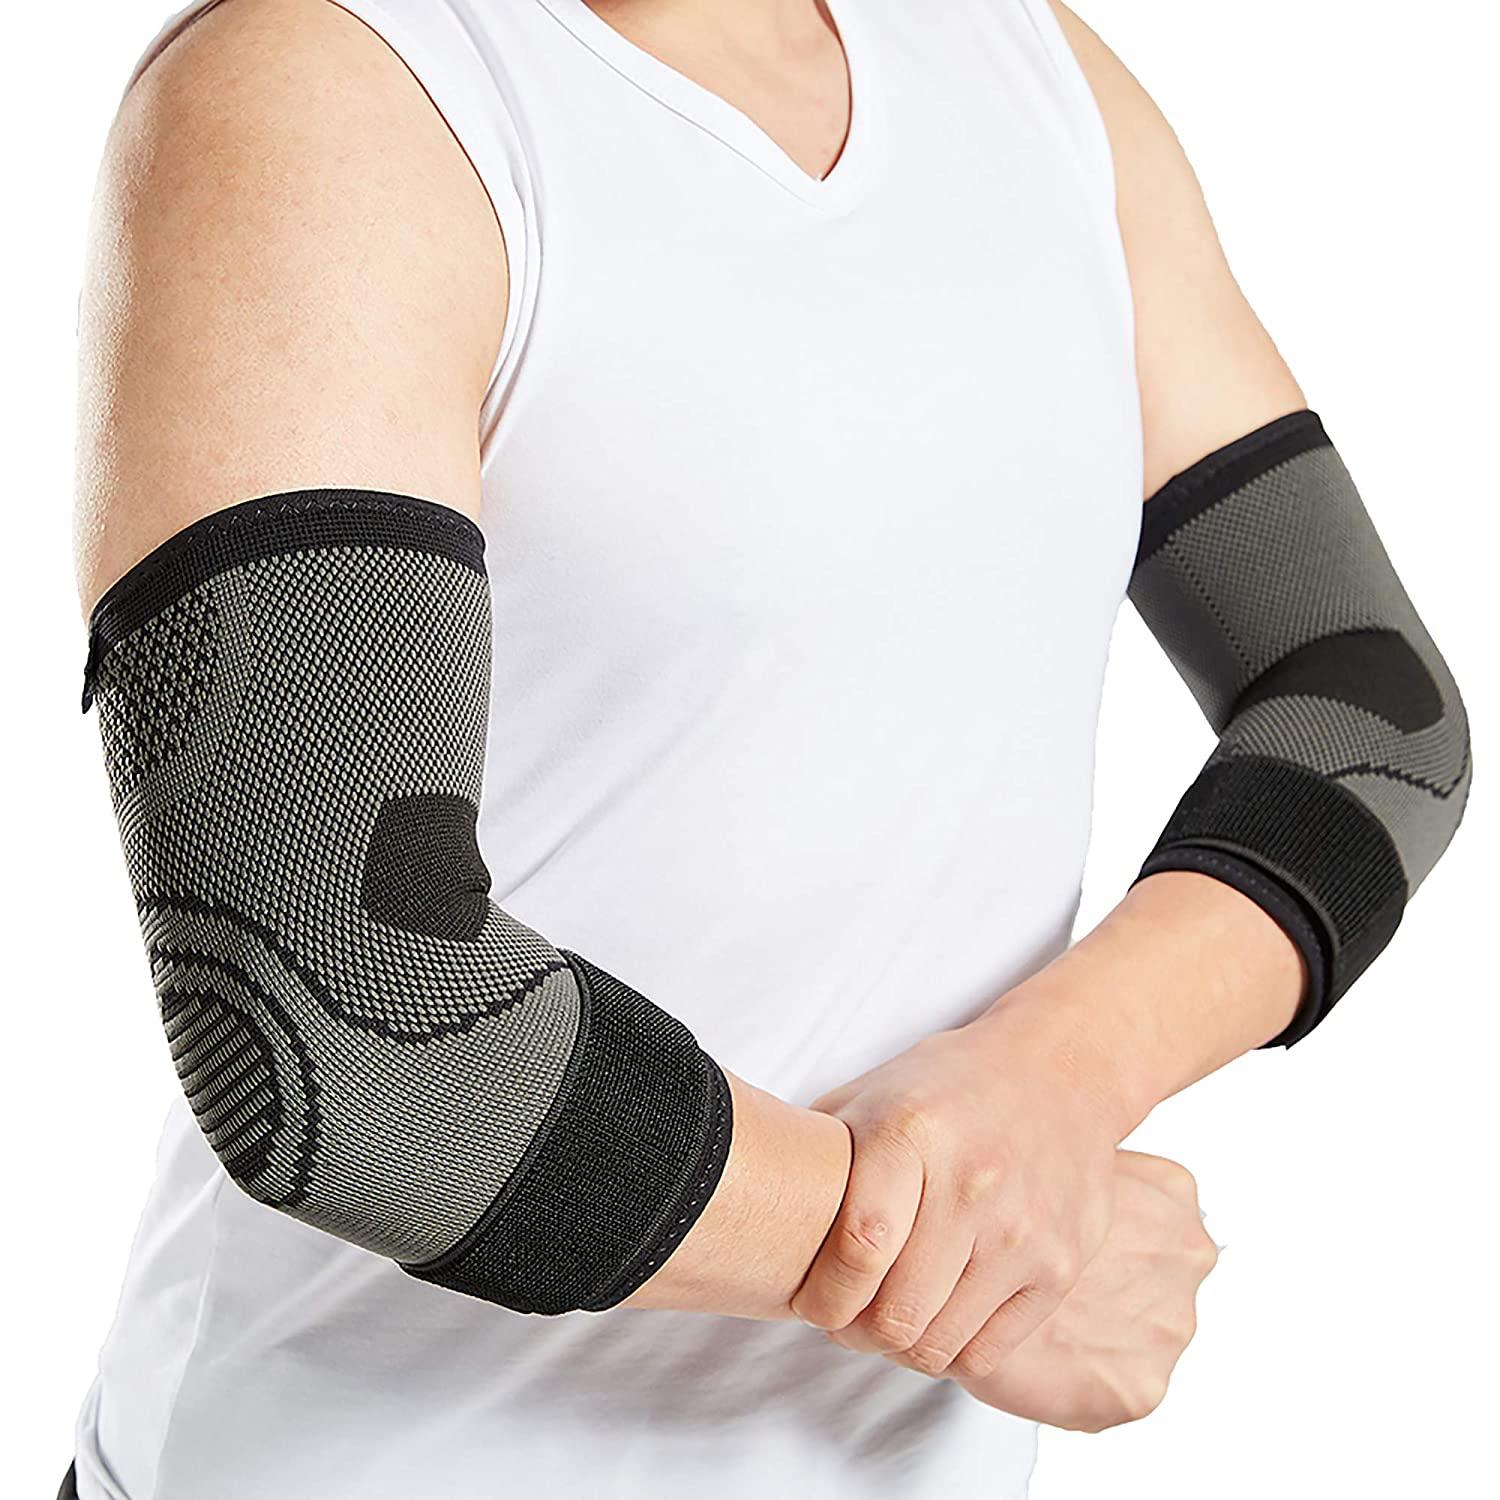 ikido Elbow Compression Sleeve, Elbow Support Brace, Instant Arm Joint  Support for Tennis Elbow, Golfers Elbow, Tendonitis, Arthritis, Bursitis  (2, Large) price in Saudi Arabia,  Saudi Arabia